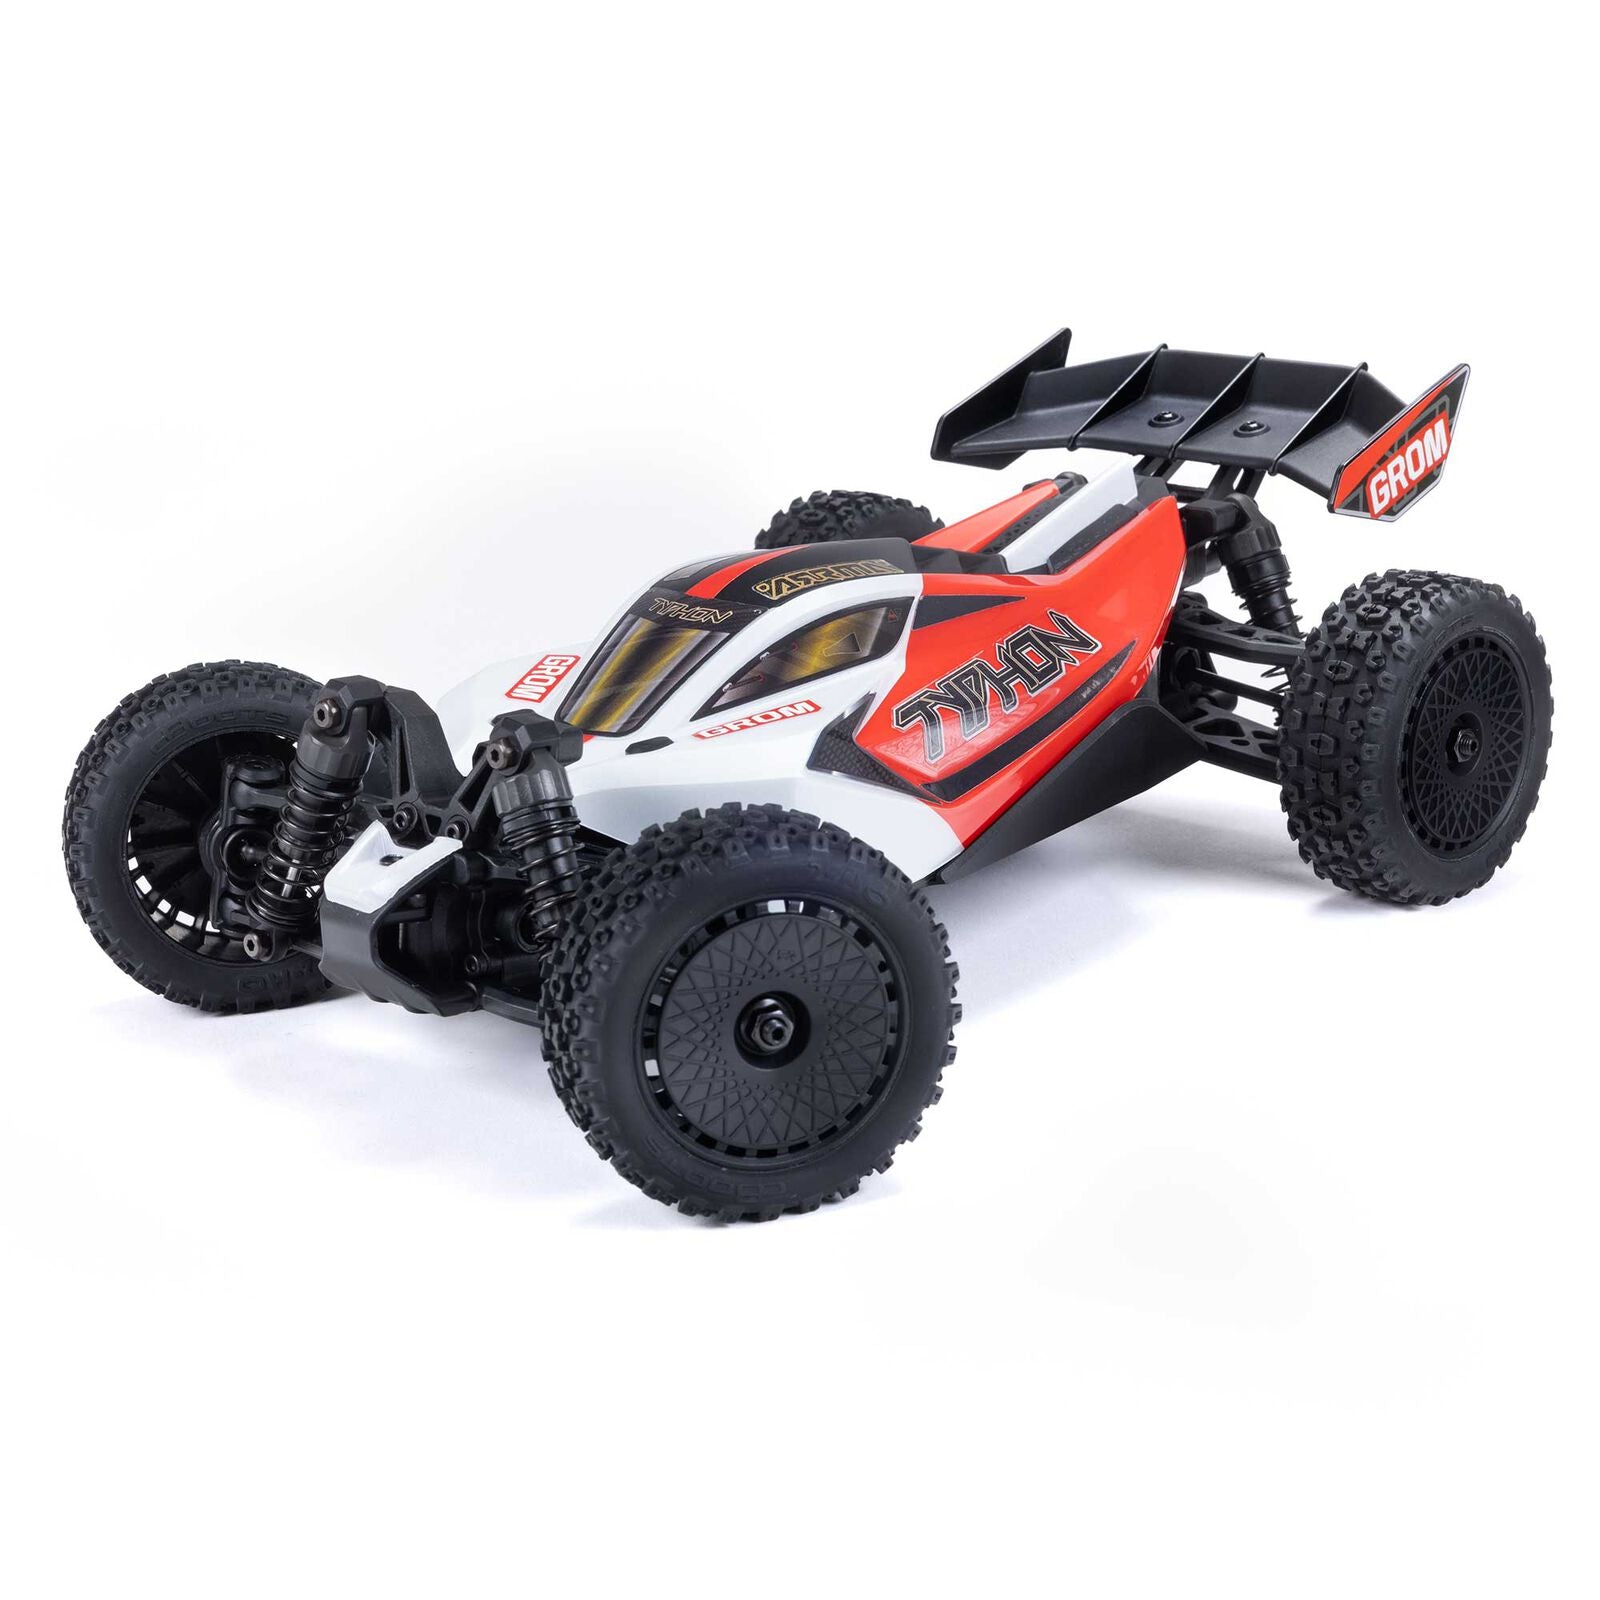 ARRMA ARA2106 TYPHON GROM MEGA 380 Brushed 4X4 Small Scale Buggy RTR with Battery & Charger